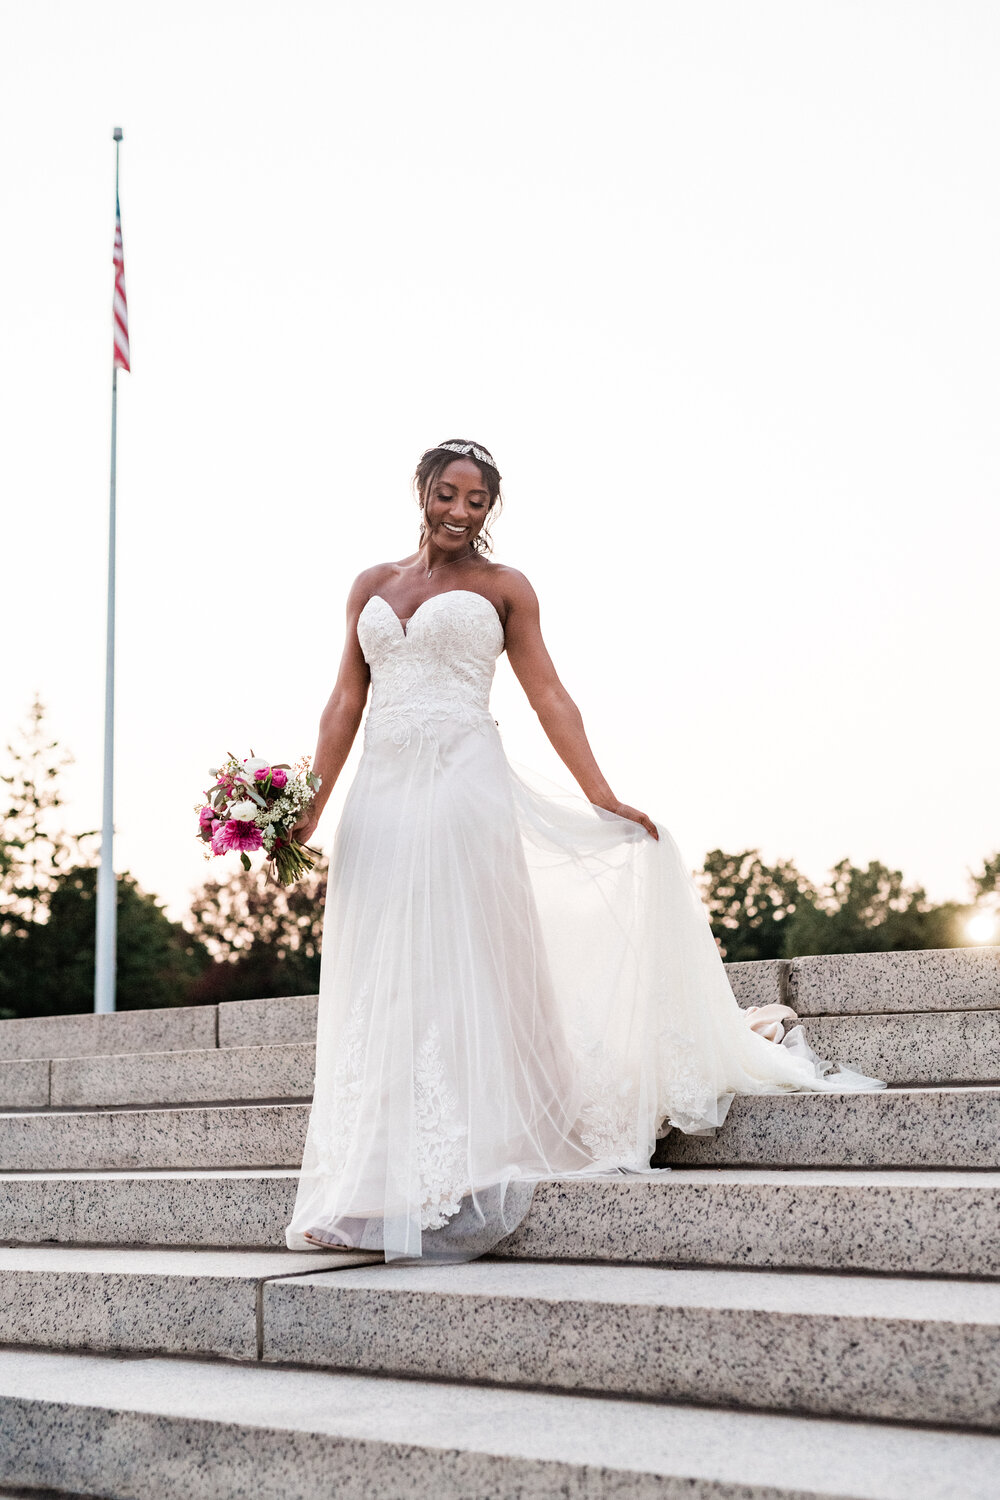 Renee Grace Bridal gown from Ivory &amp; Ash Bridal featured in a styled shoot